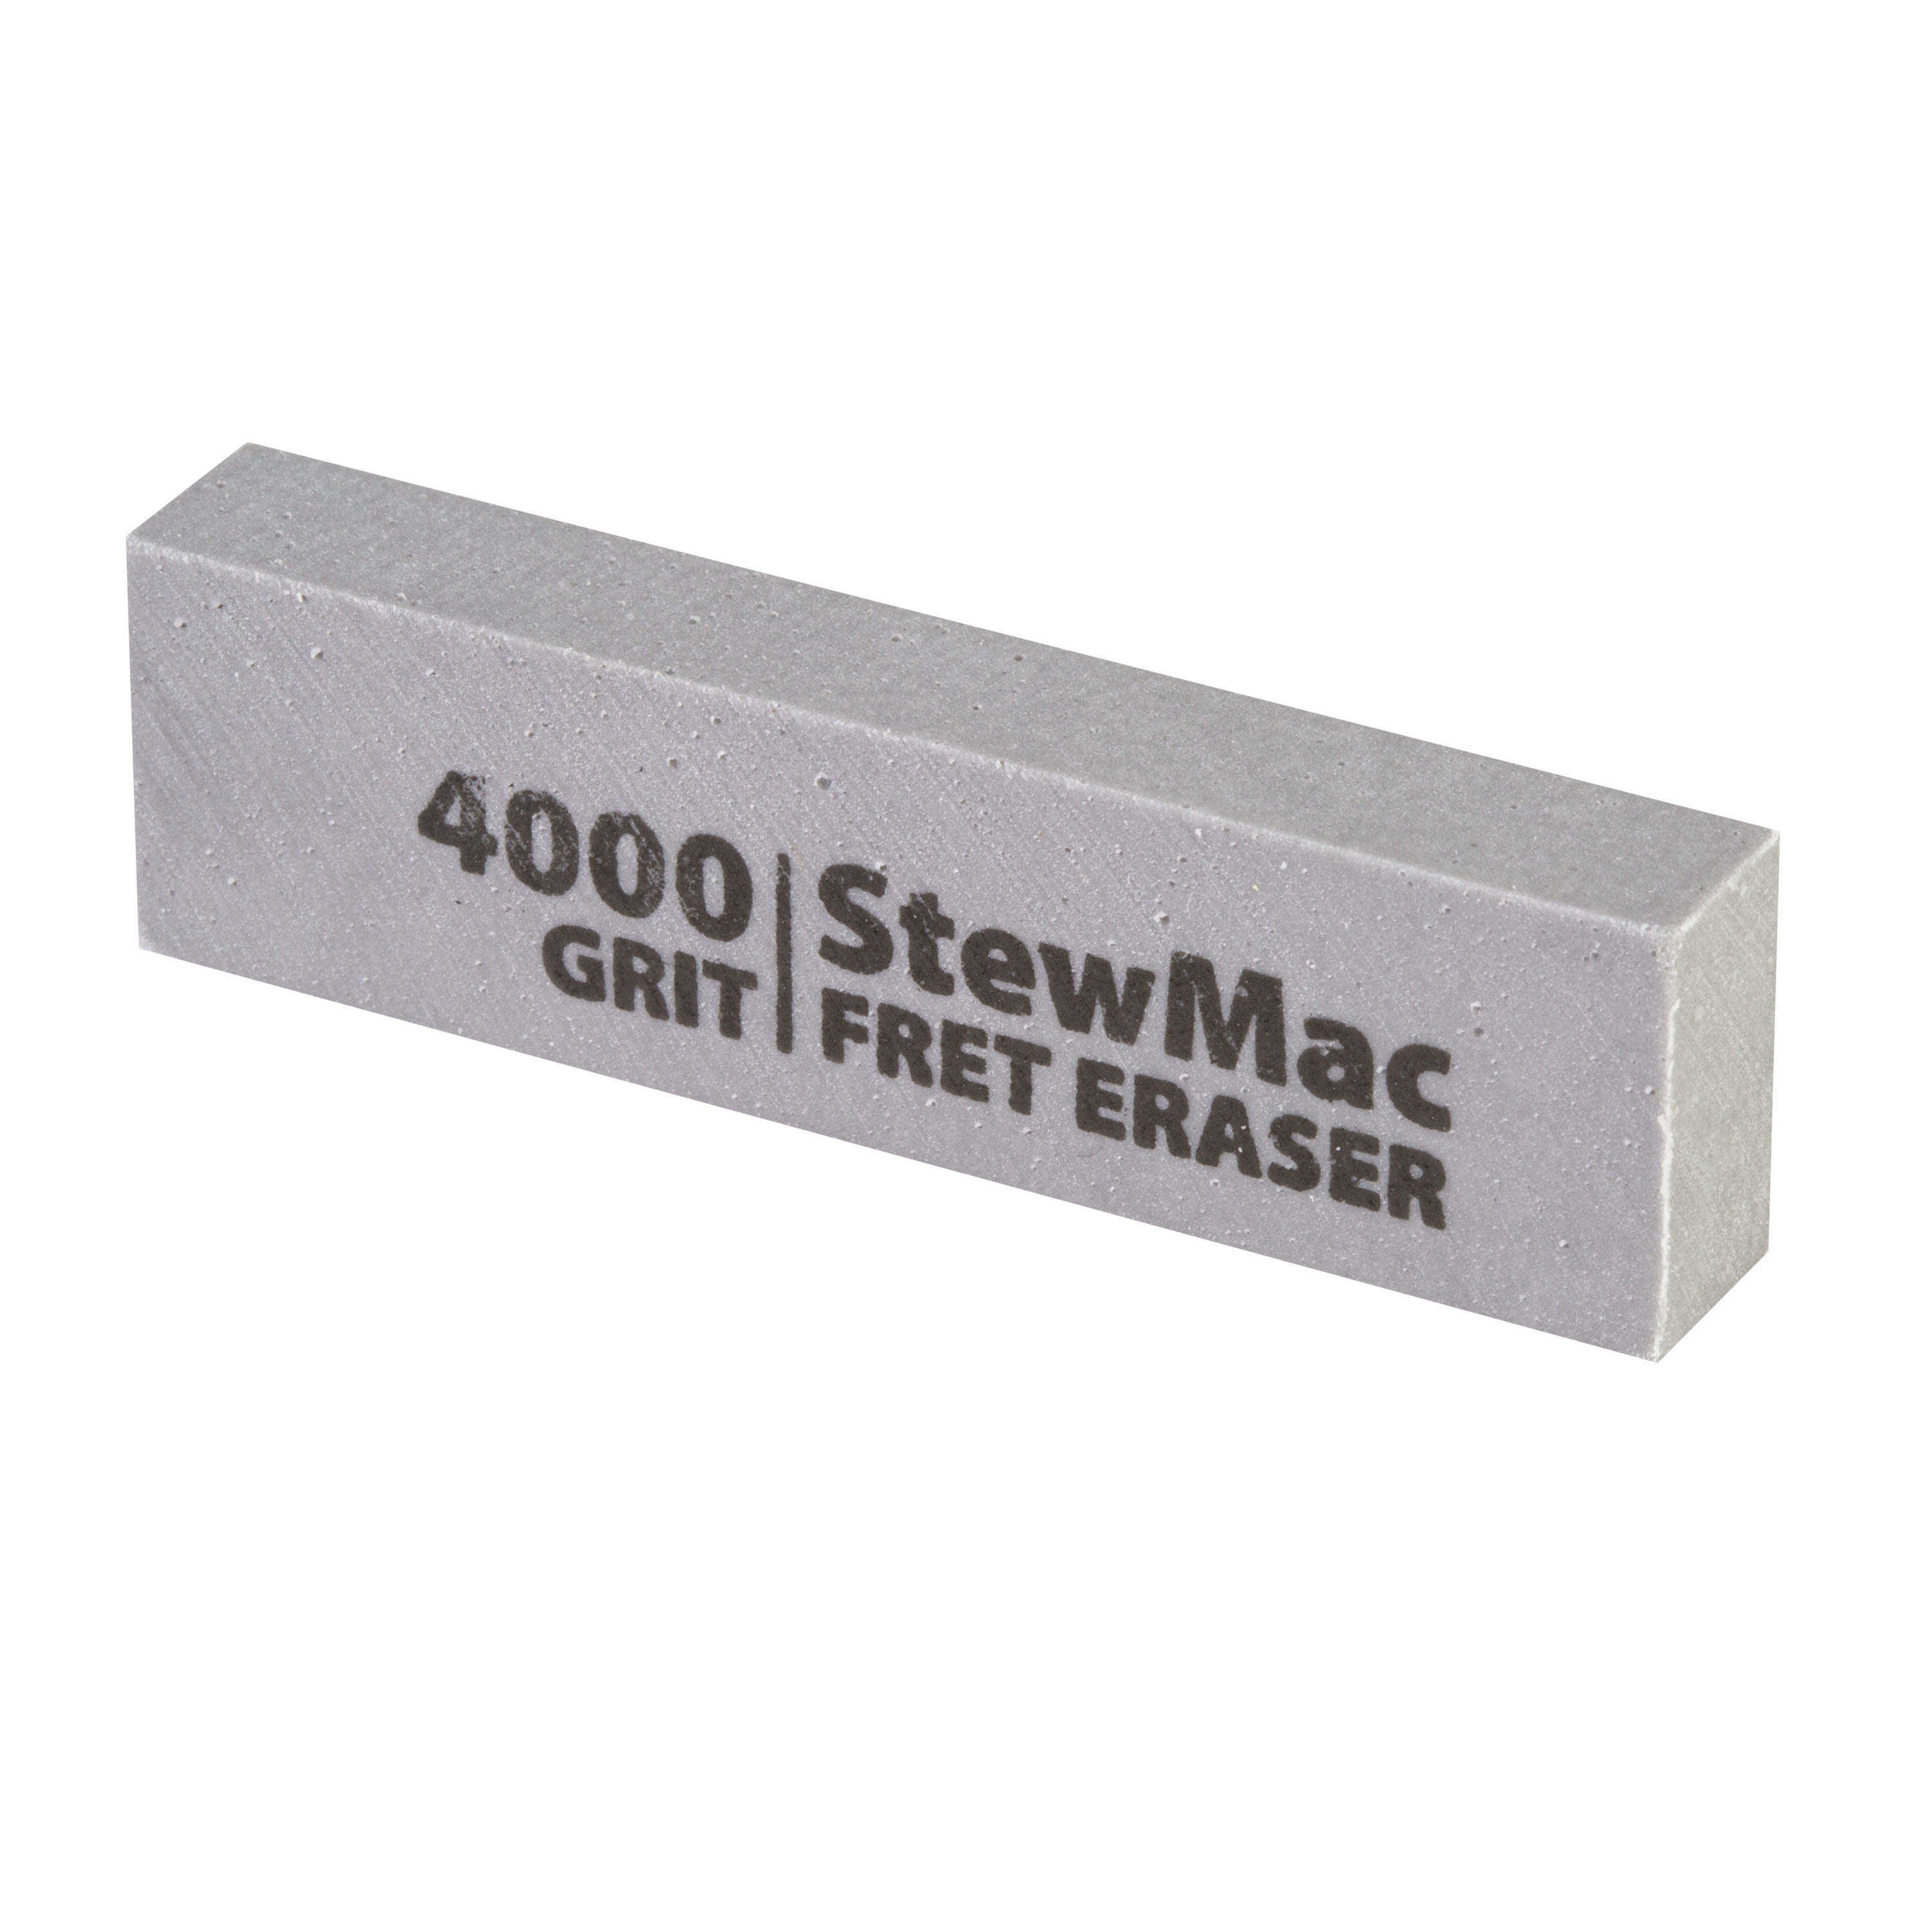 Fret Erasers, 220-Grit, White from StewMac. StewMac